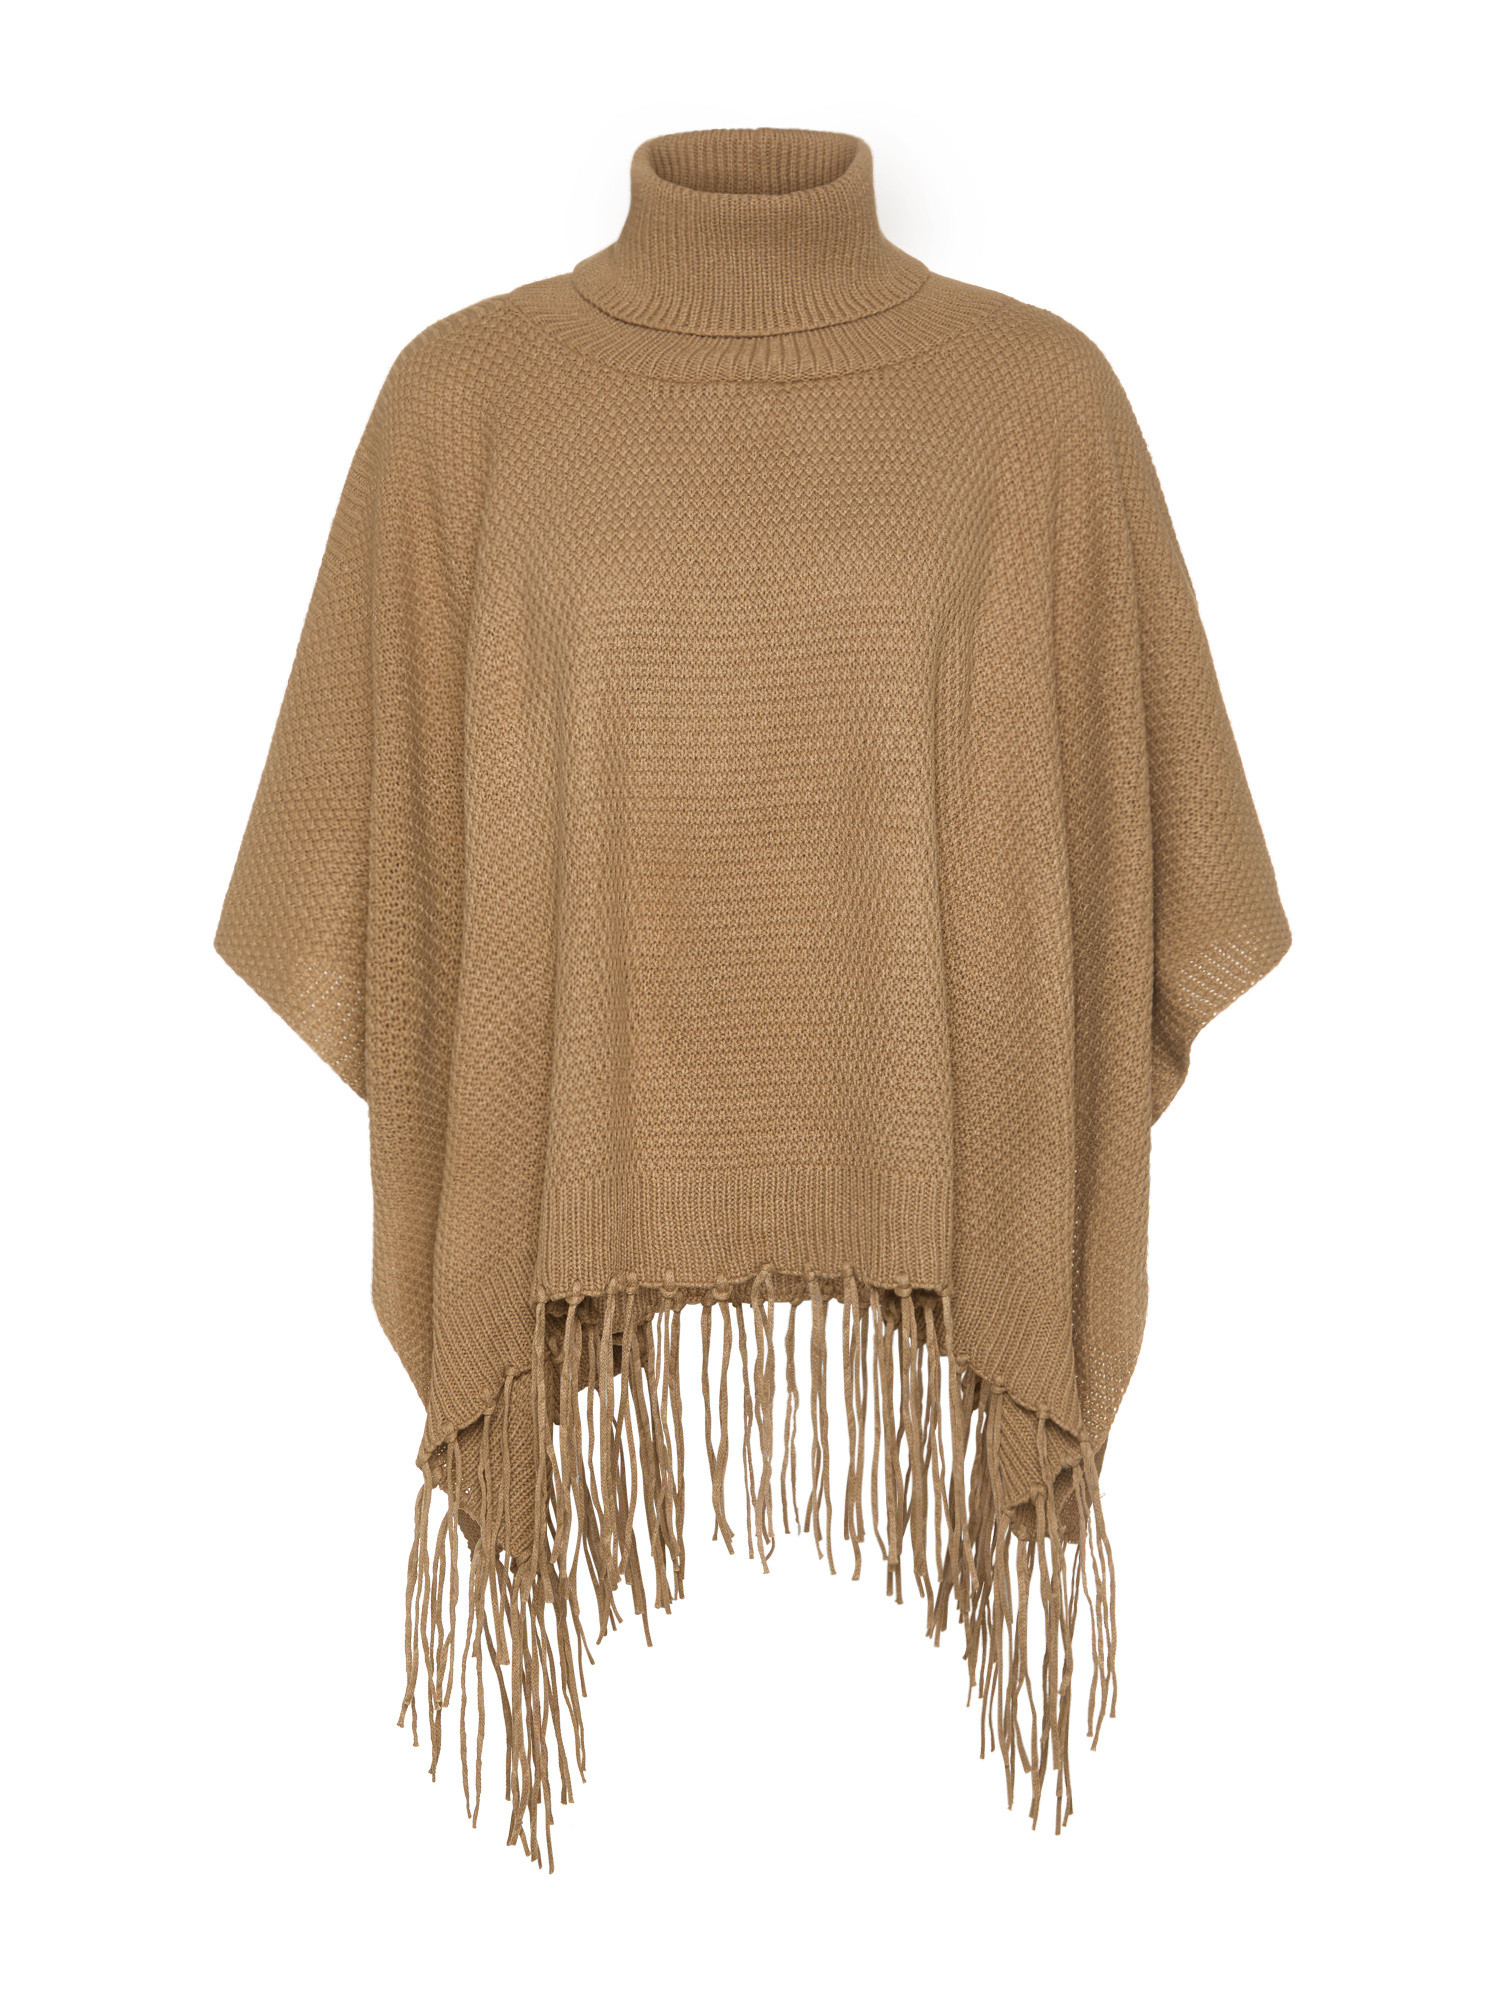 Koan - Knitted poncho, Camel, large image number 0